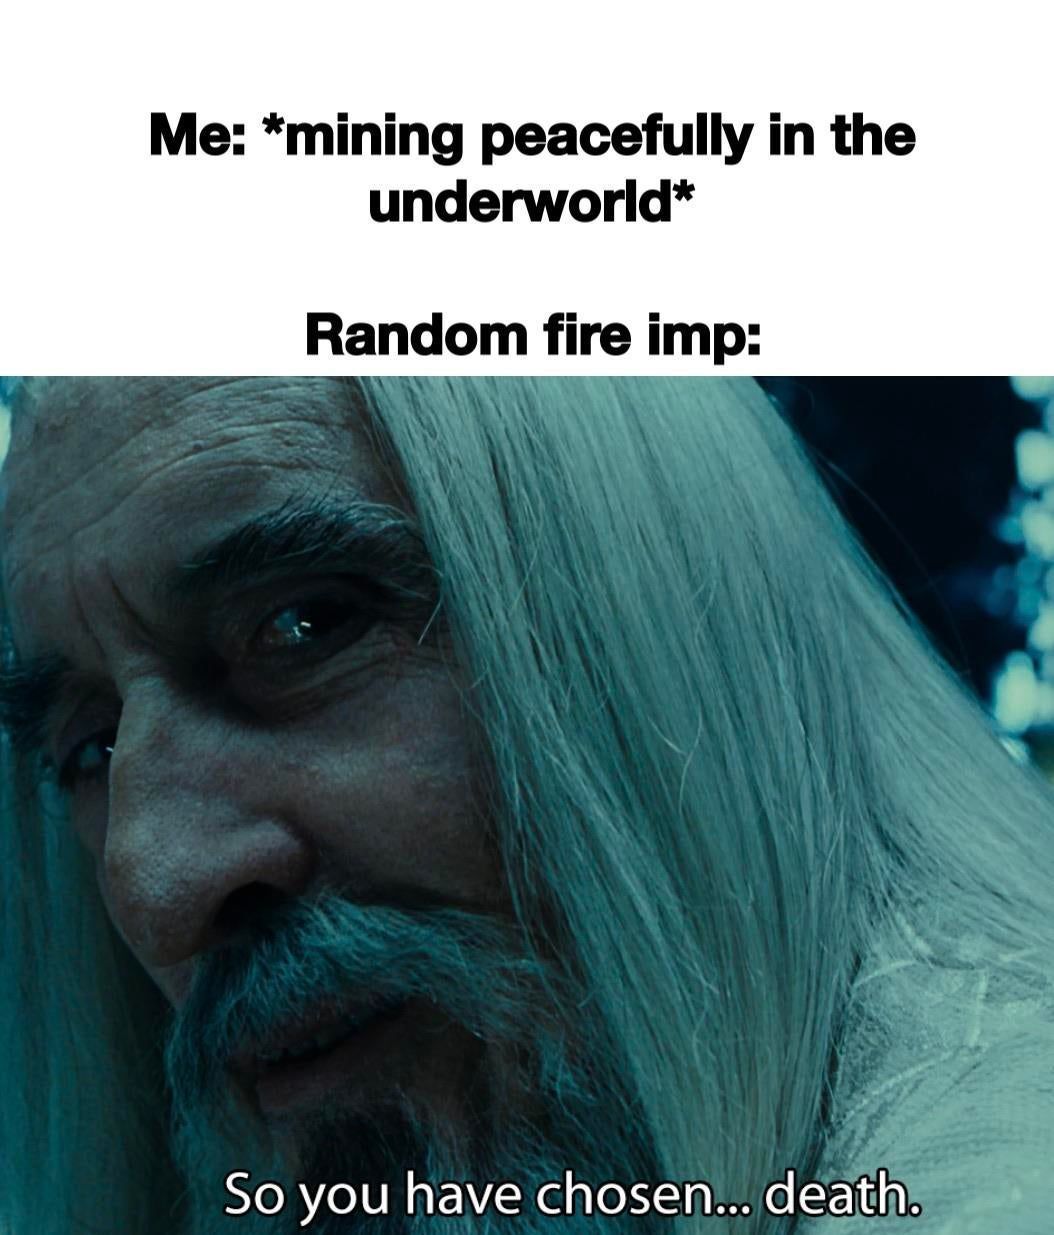 meme about fire imps being hostile.